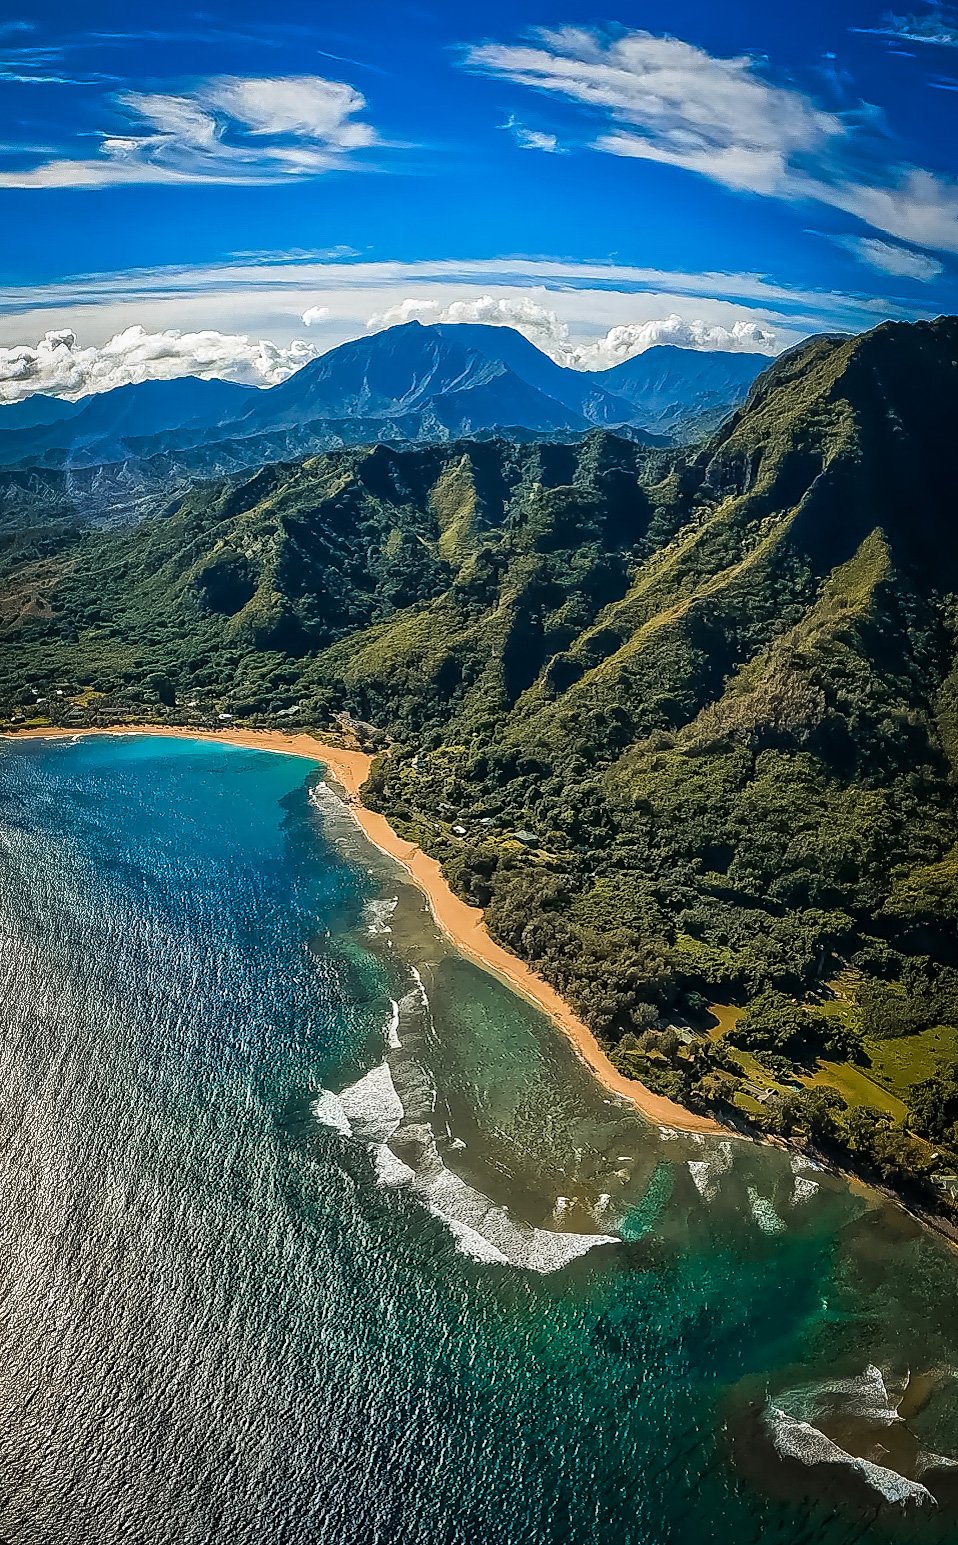 Cost of a Kauai Helicopter Tour